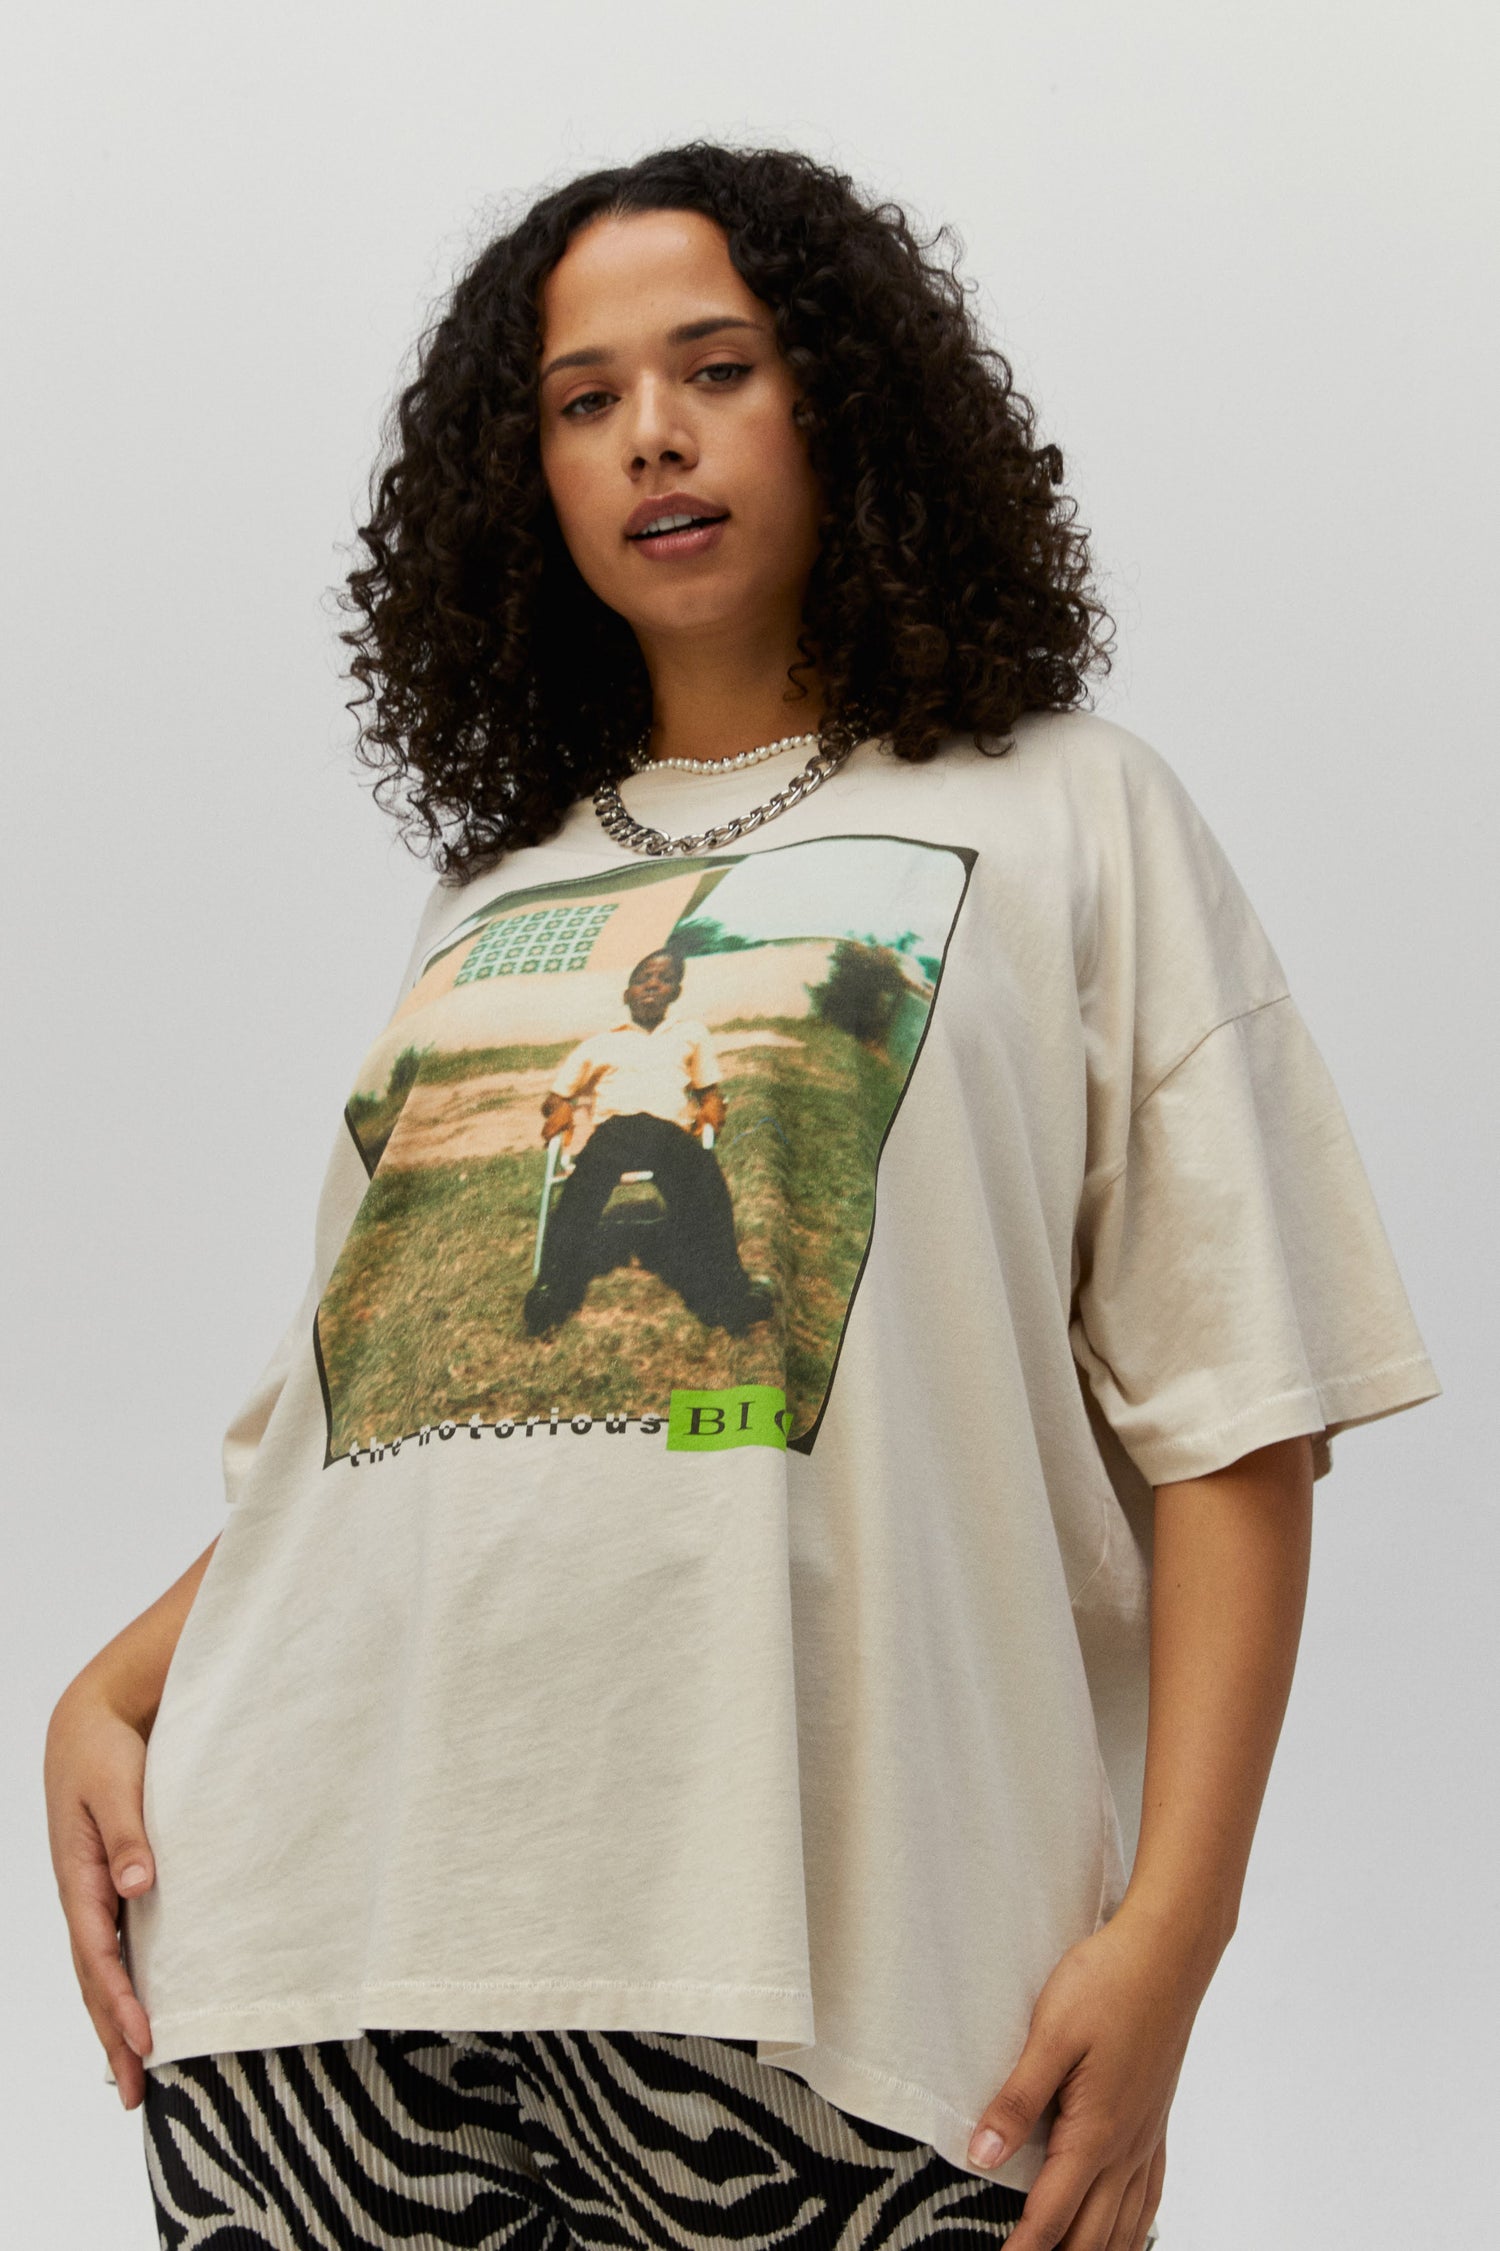 plus size authentic-looking piece of merch